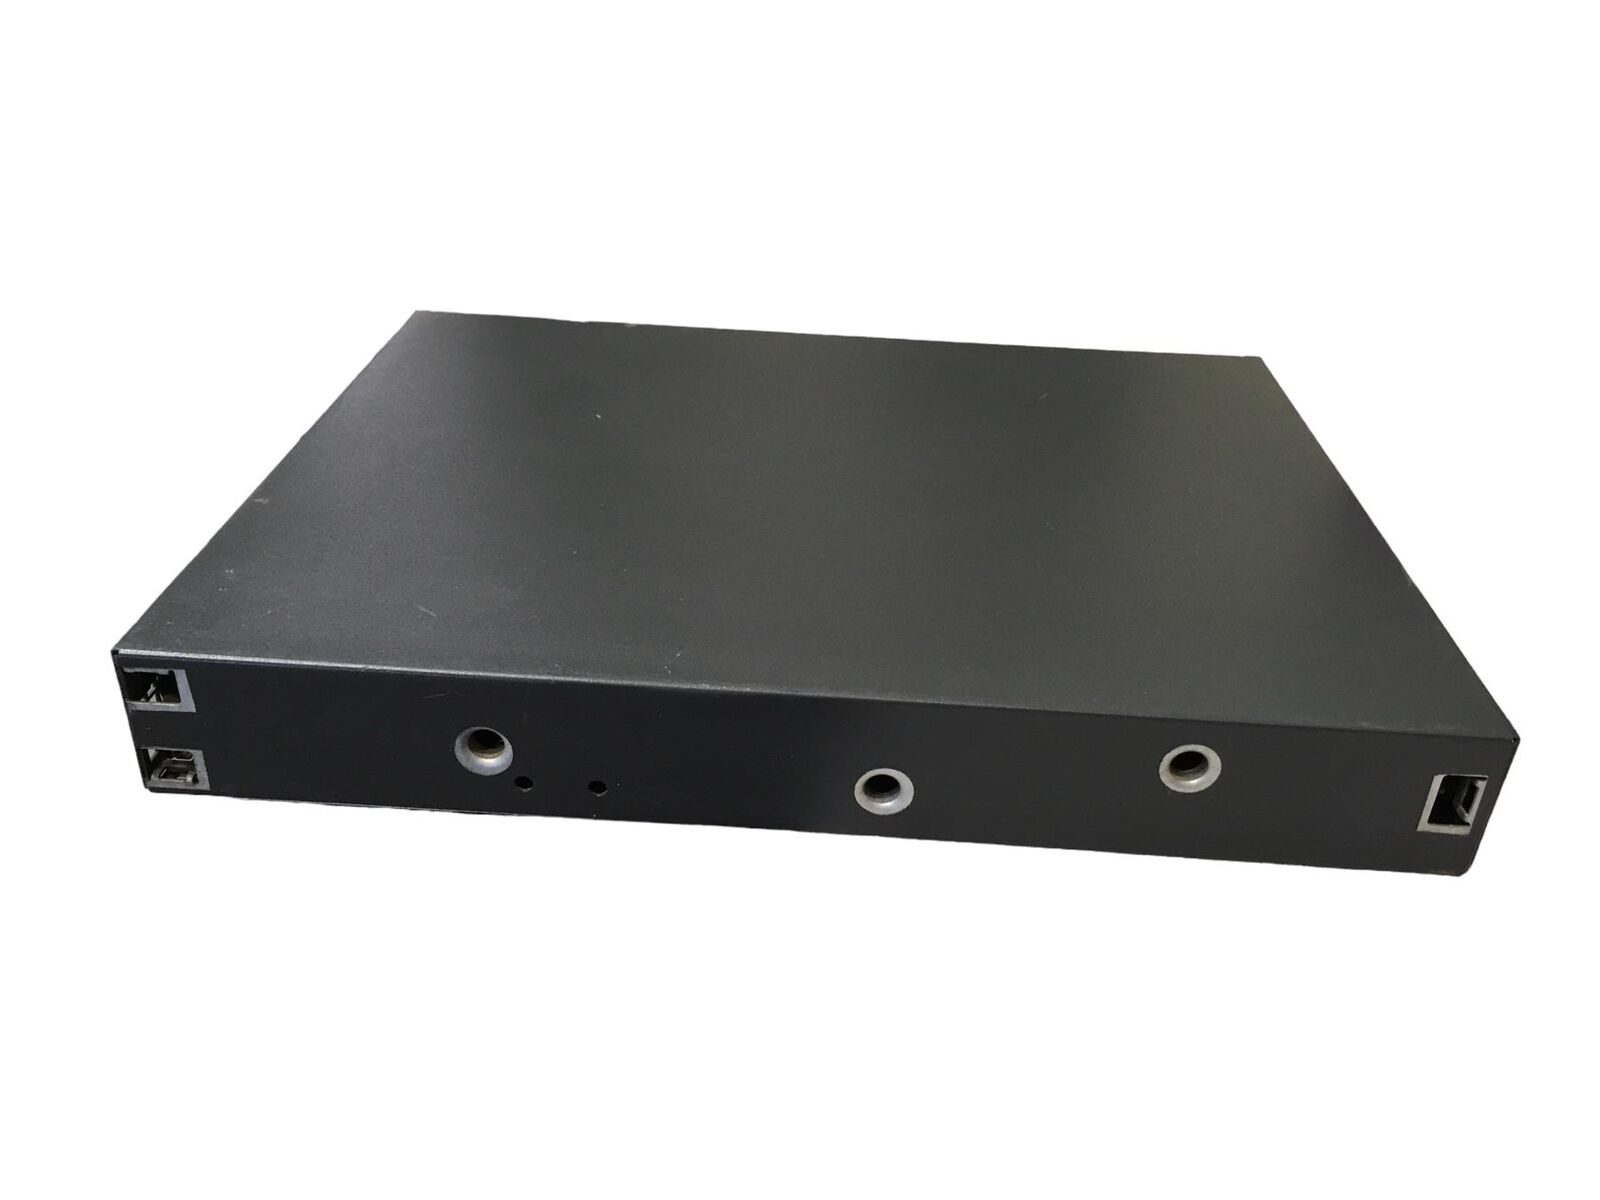 CISCO 1840 Series Integrated Services Router